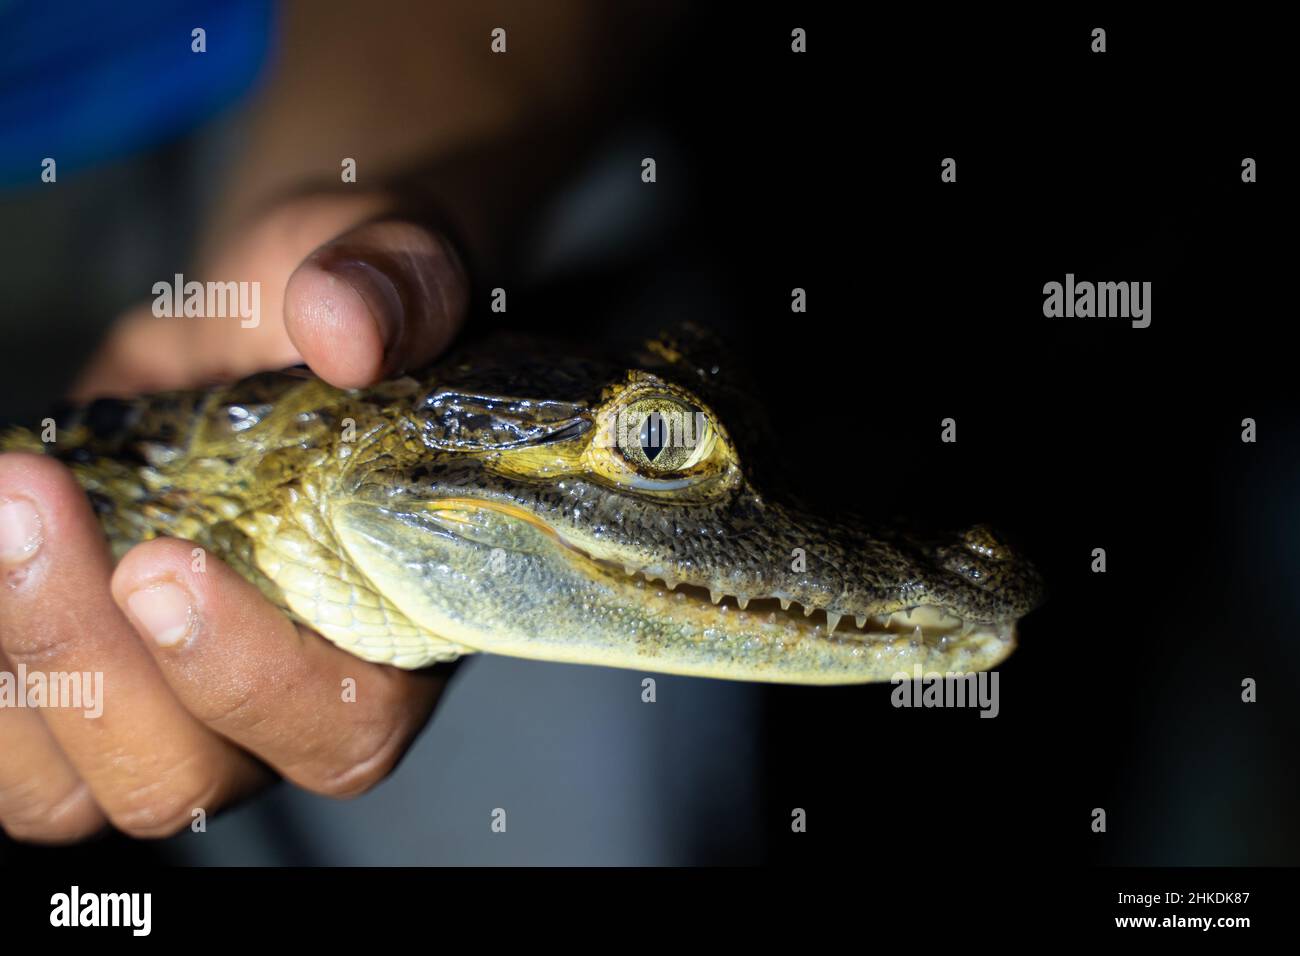 Discovery of baby caiman during a nocturnal canoe trip, Amazonia, Colombia Stock Photo